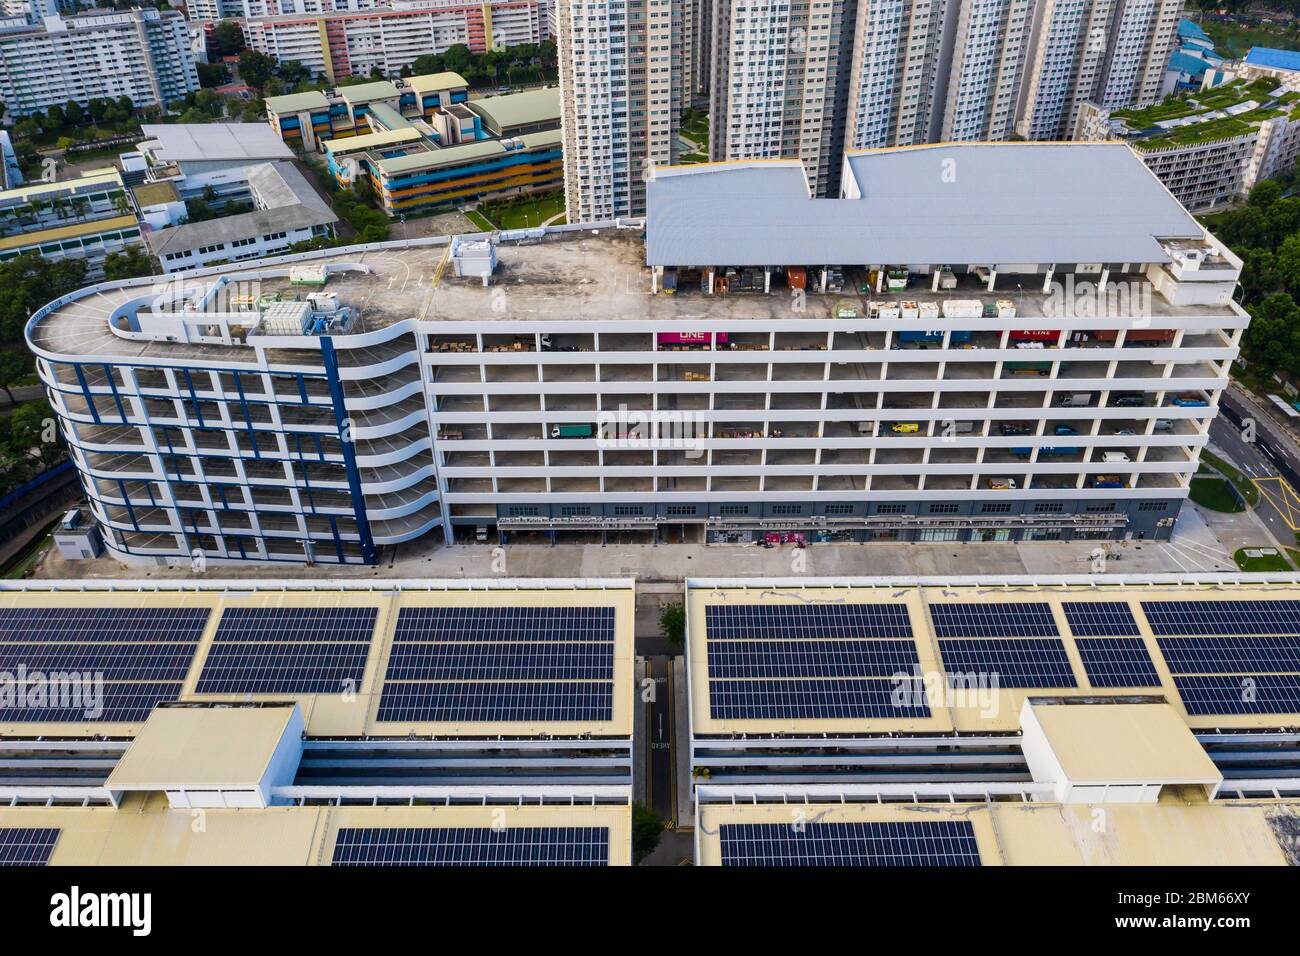 Aerial view of a Light Industrial building and solar panels mounted on the industry roof to absorb light energy, Singapore. Stock Photo